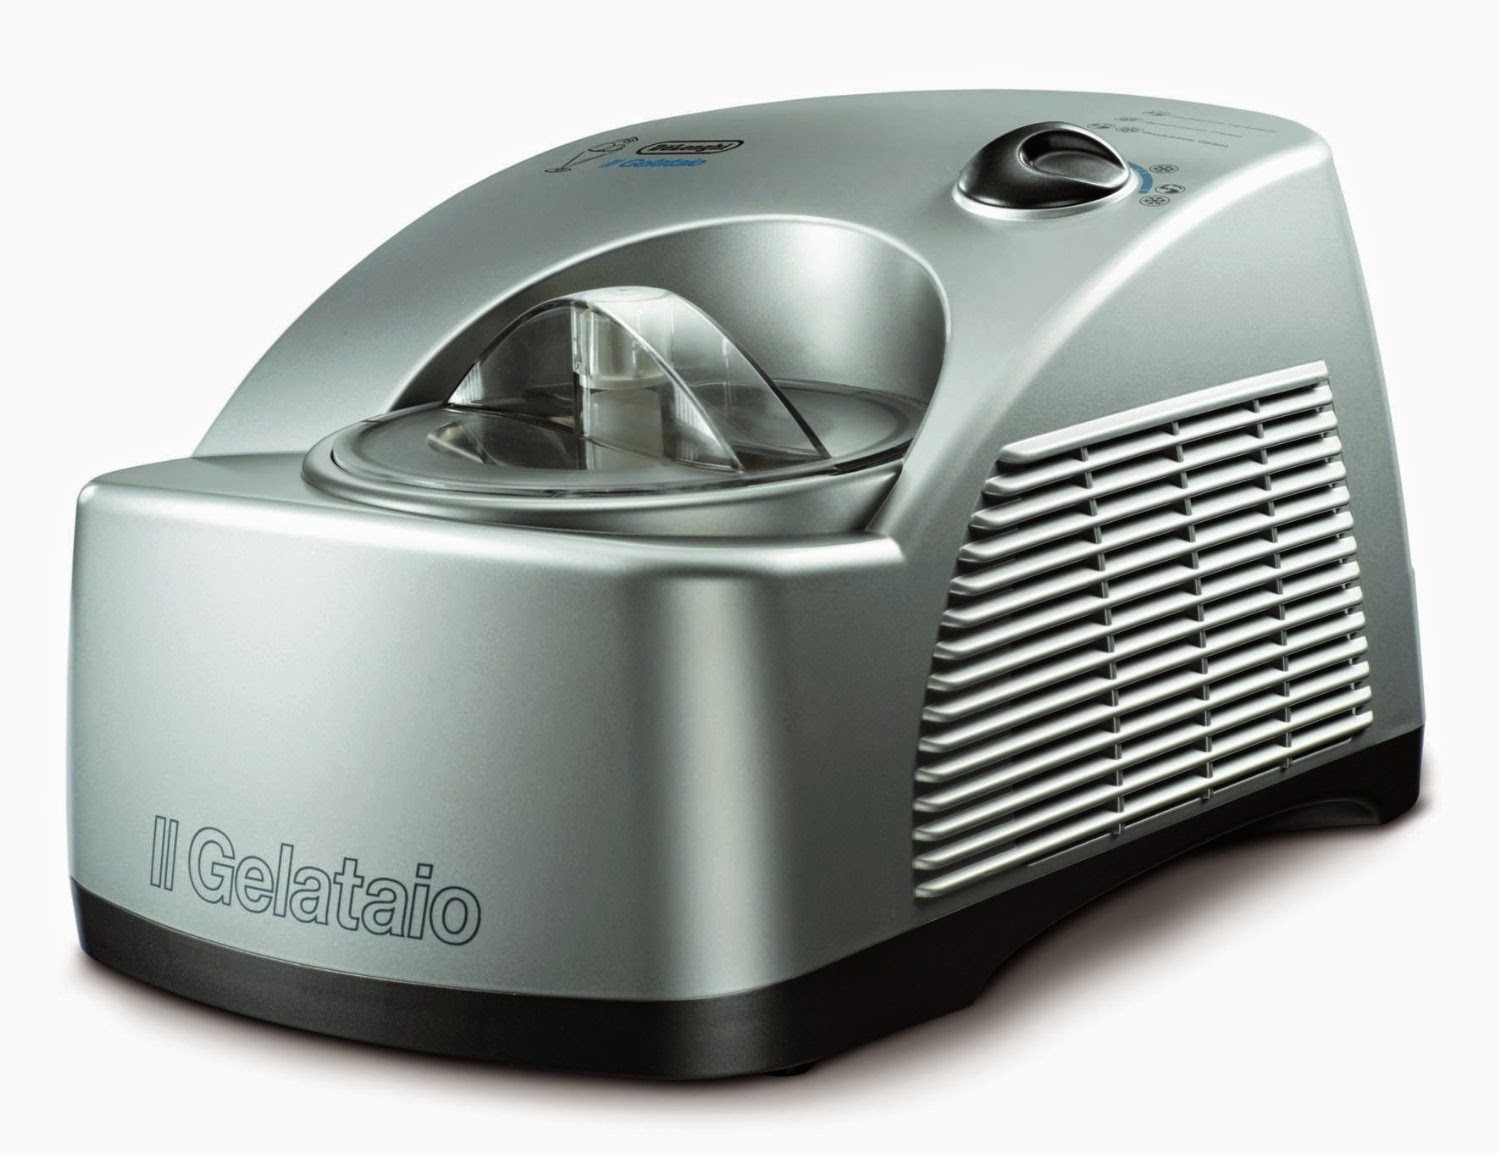 DeLonghi GM6000 Gelato Maker with Self-Refrigerating Compressor, make gelato from fresh ingredients in less than 30 minutes